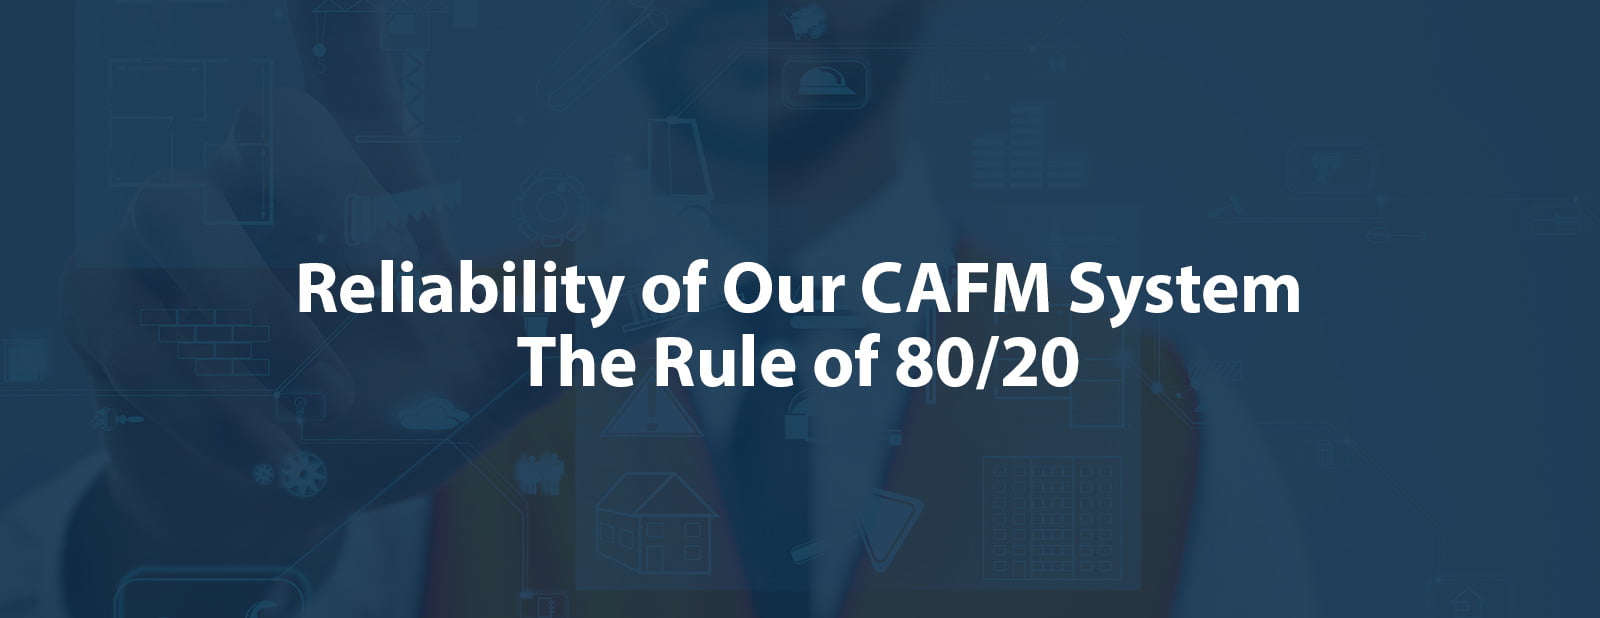 Reliability of Our CAFM System, The Rule of 80/20